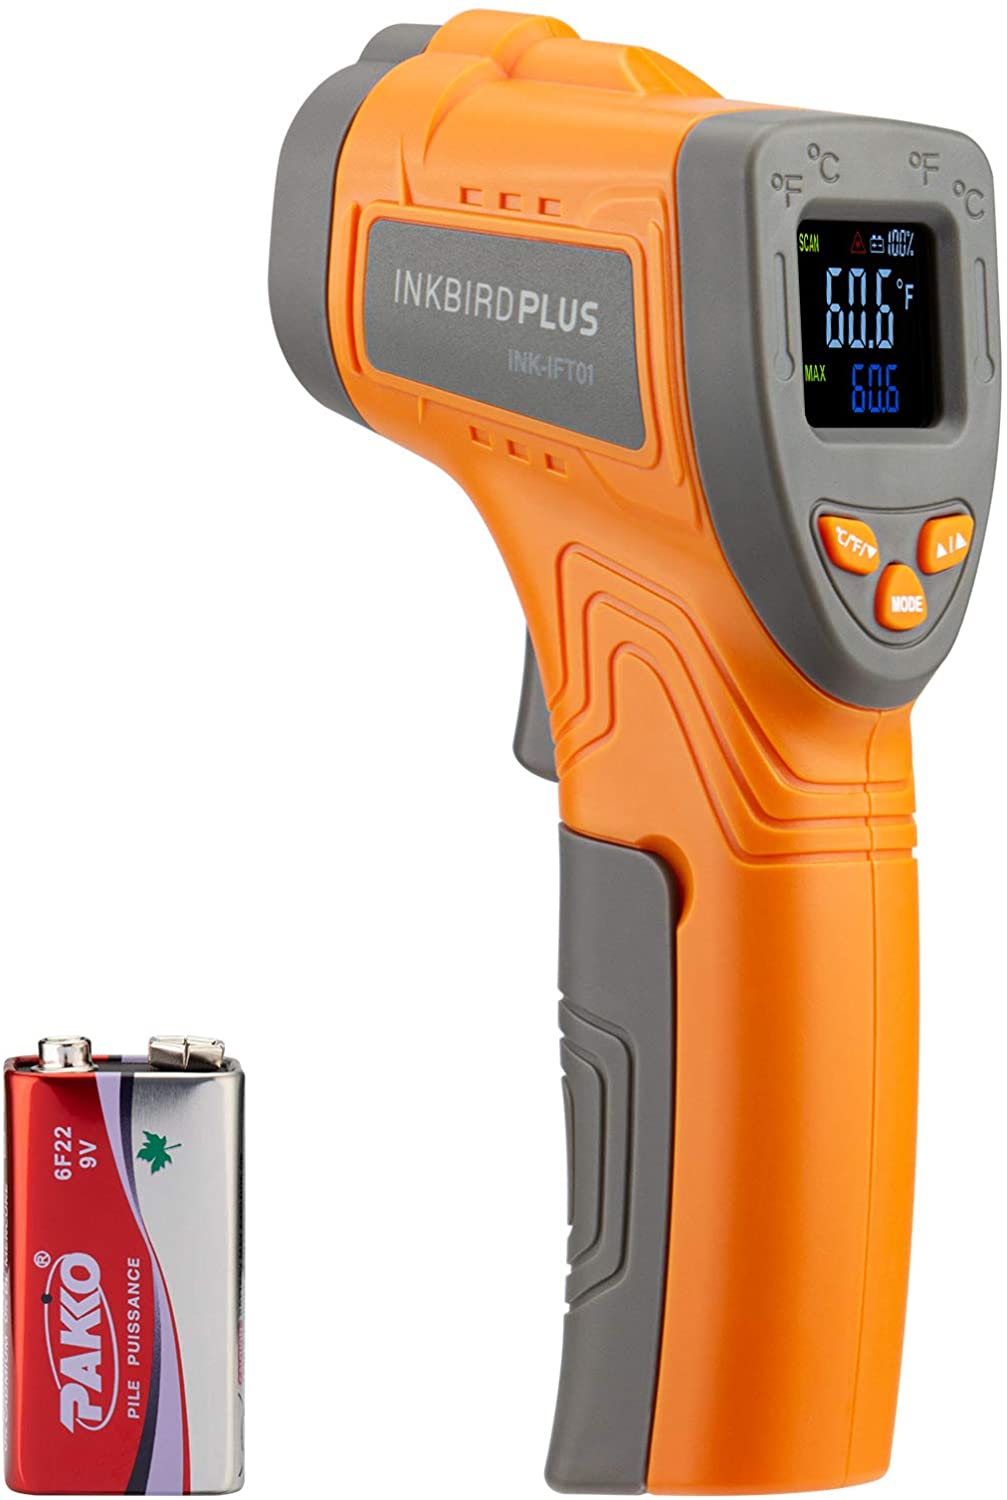 Inkbird Infrared Thermometer, Non-Contact Digital Temperature Gun with Adjustable Emissivity and Max Measure Instant Read Thermometer for Cooking, Barbecue, Automotive, and Industrial (NOT for Human)